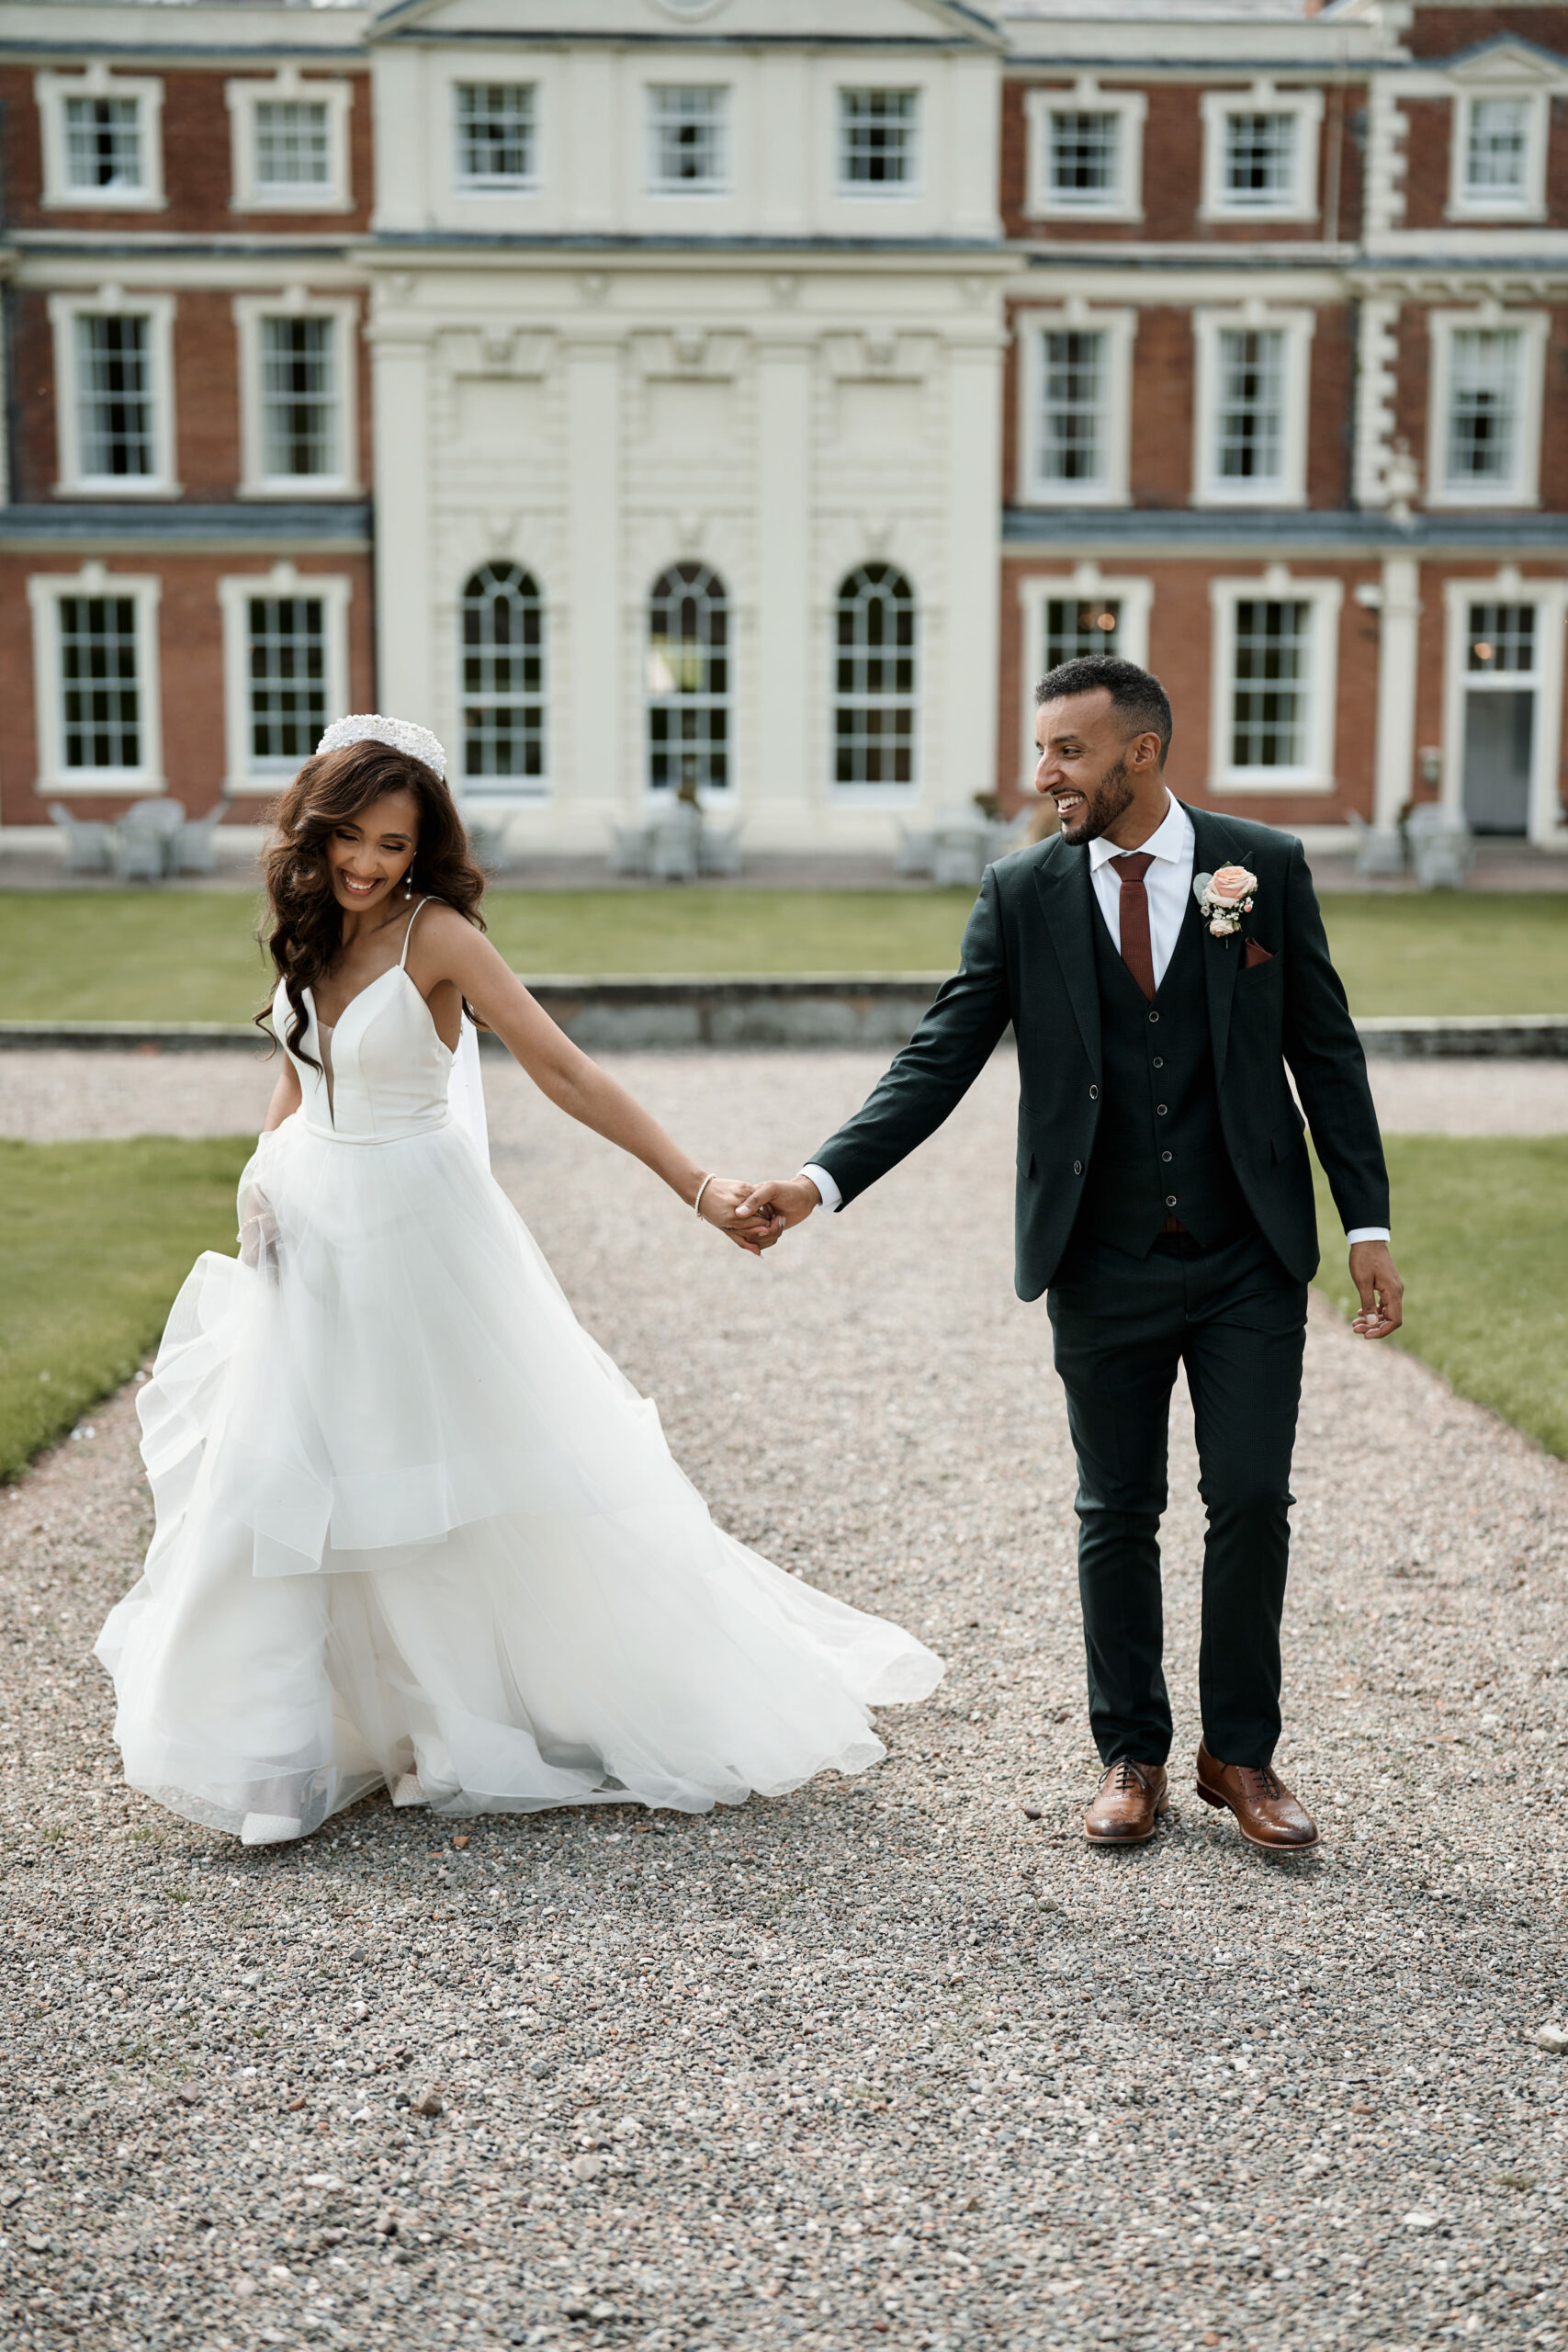 A couple getting married is holding hands in front of a big house.